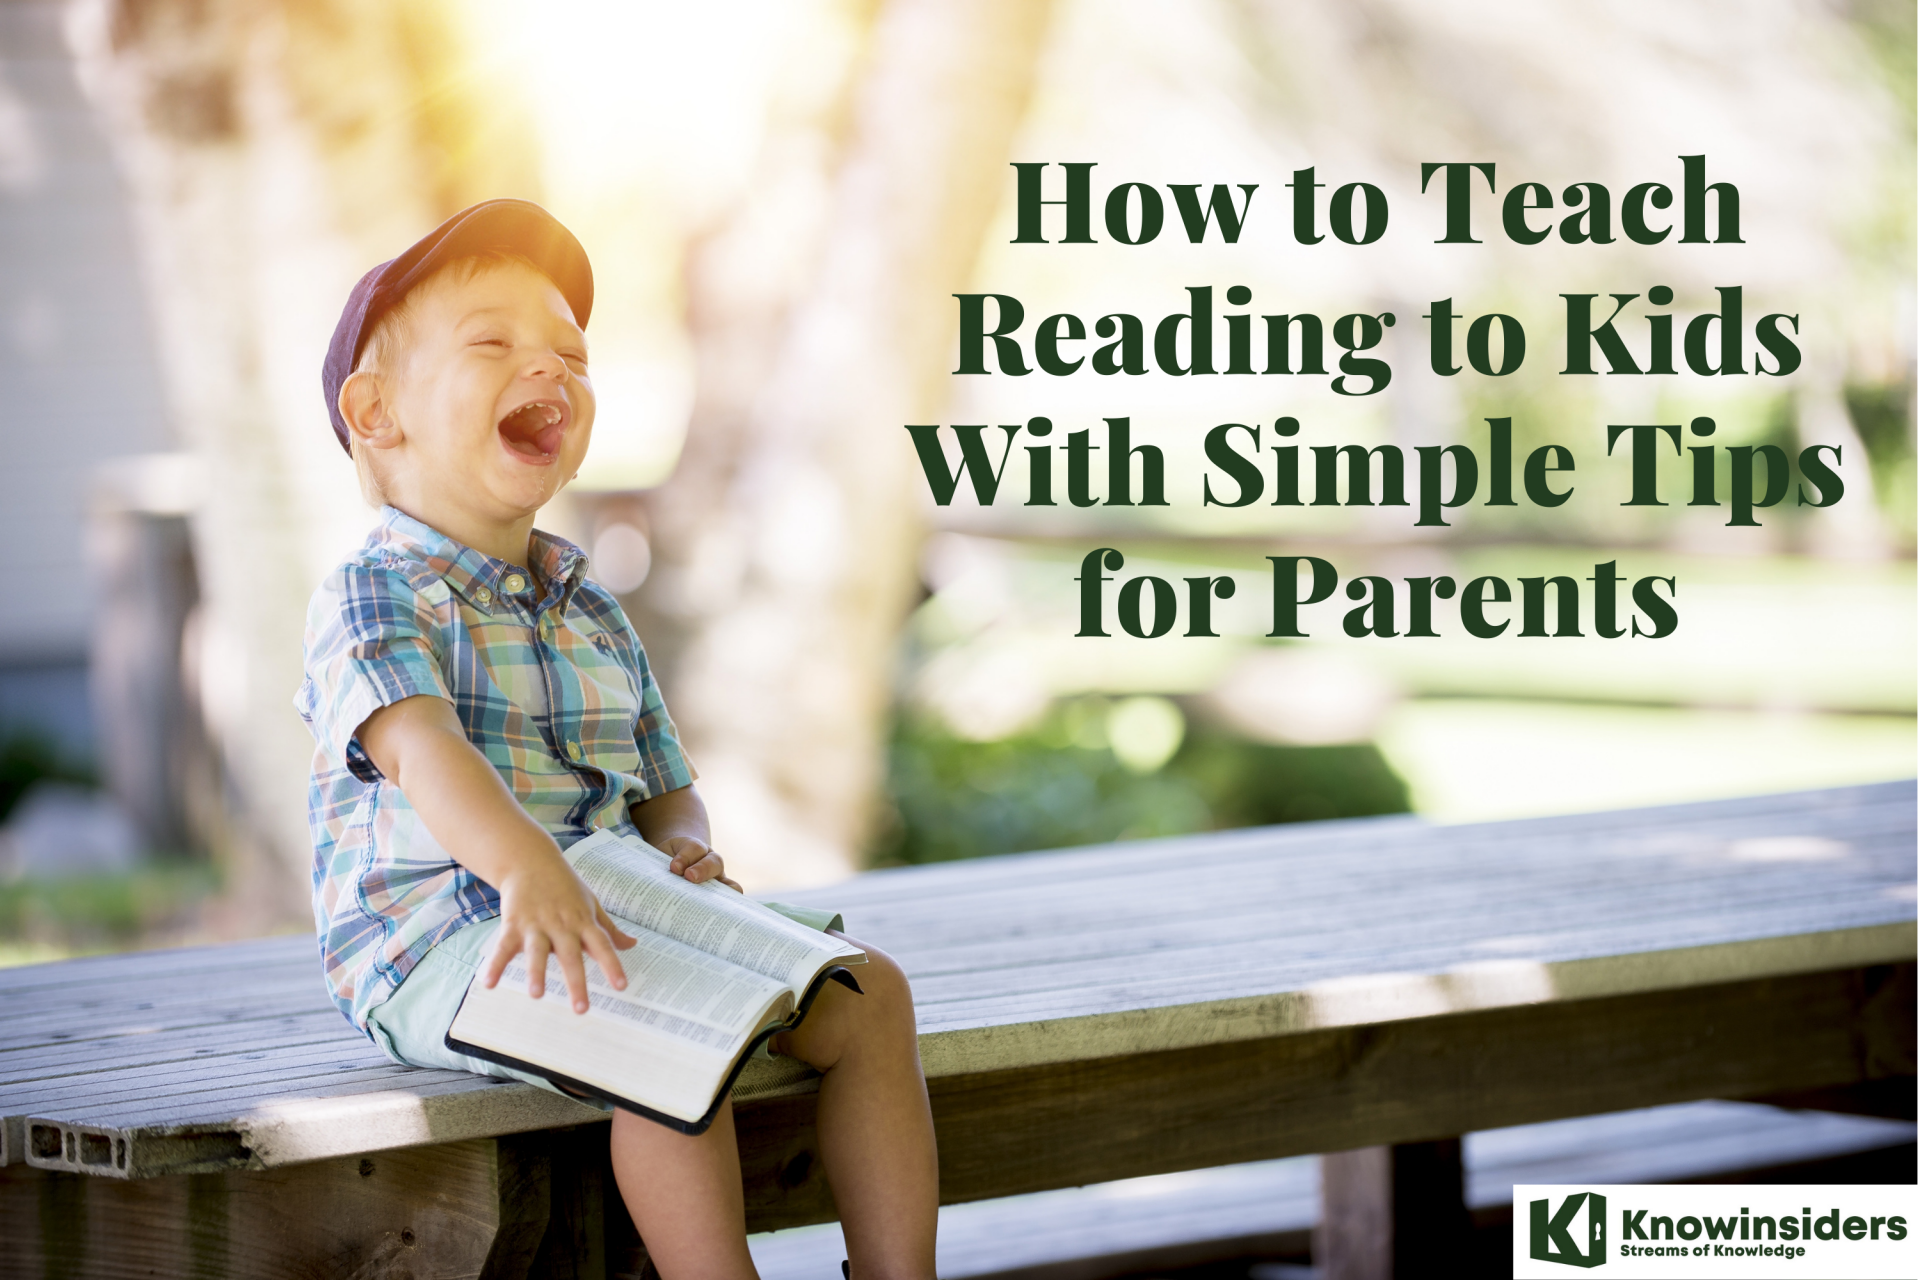 How to Teach Reading for Kids at Home with Simple Tips